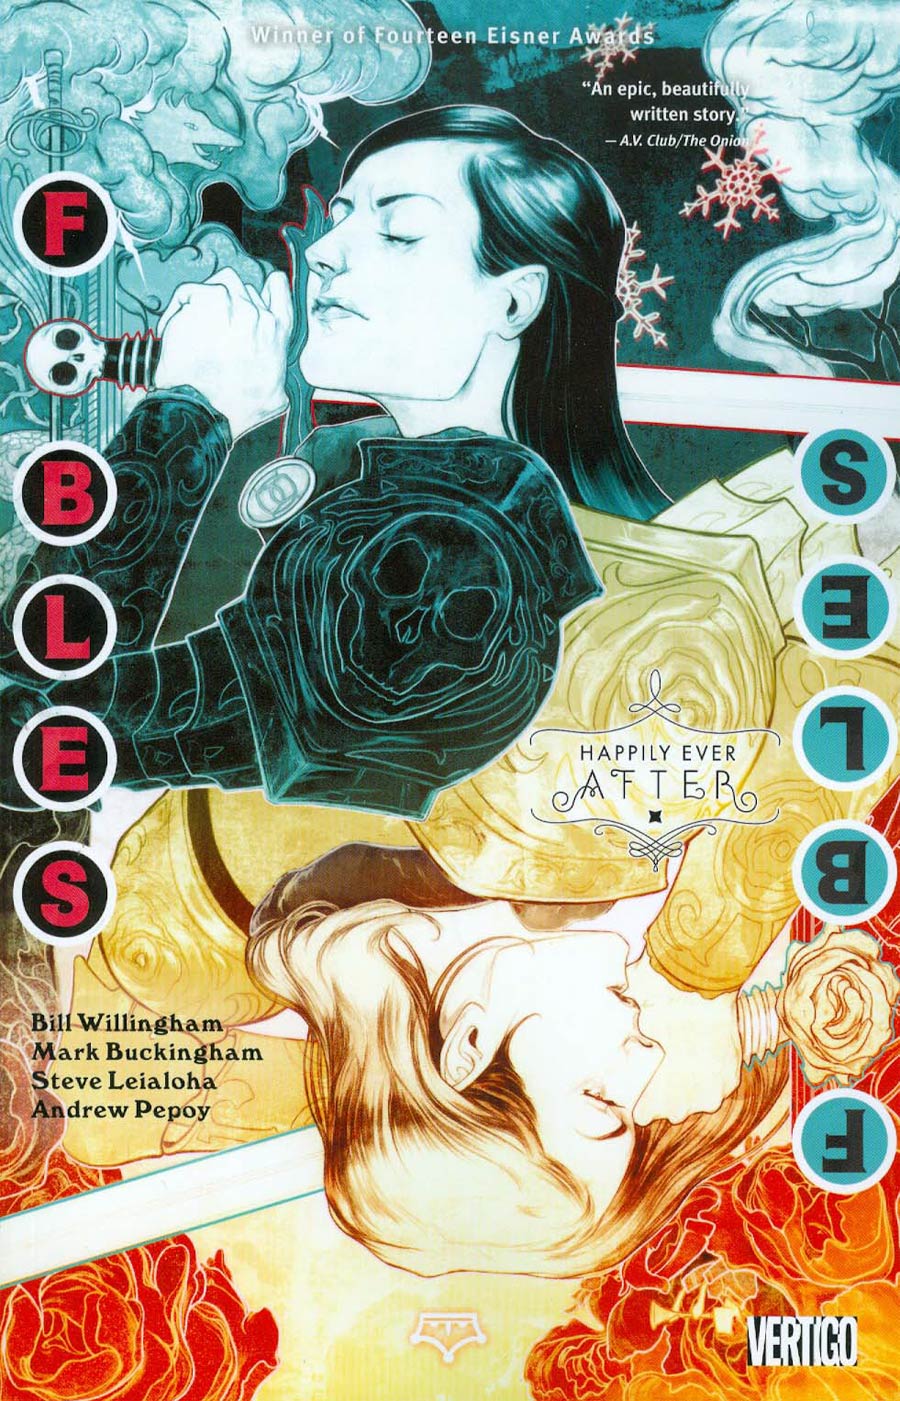 Fables Vol 21 Happily Ever After TP